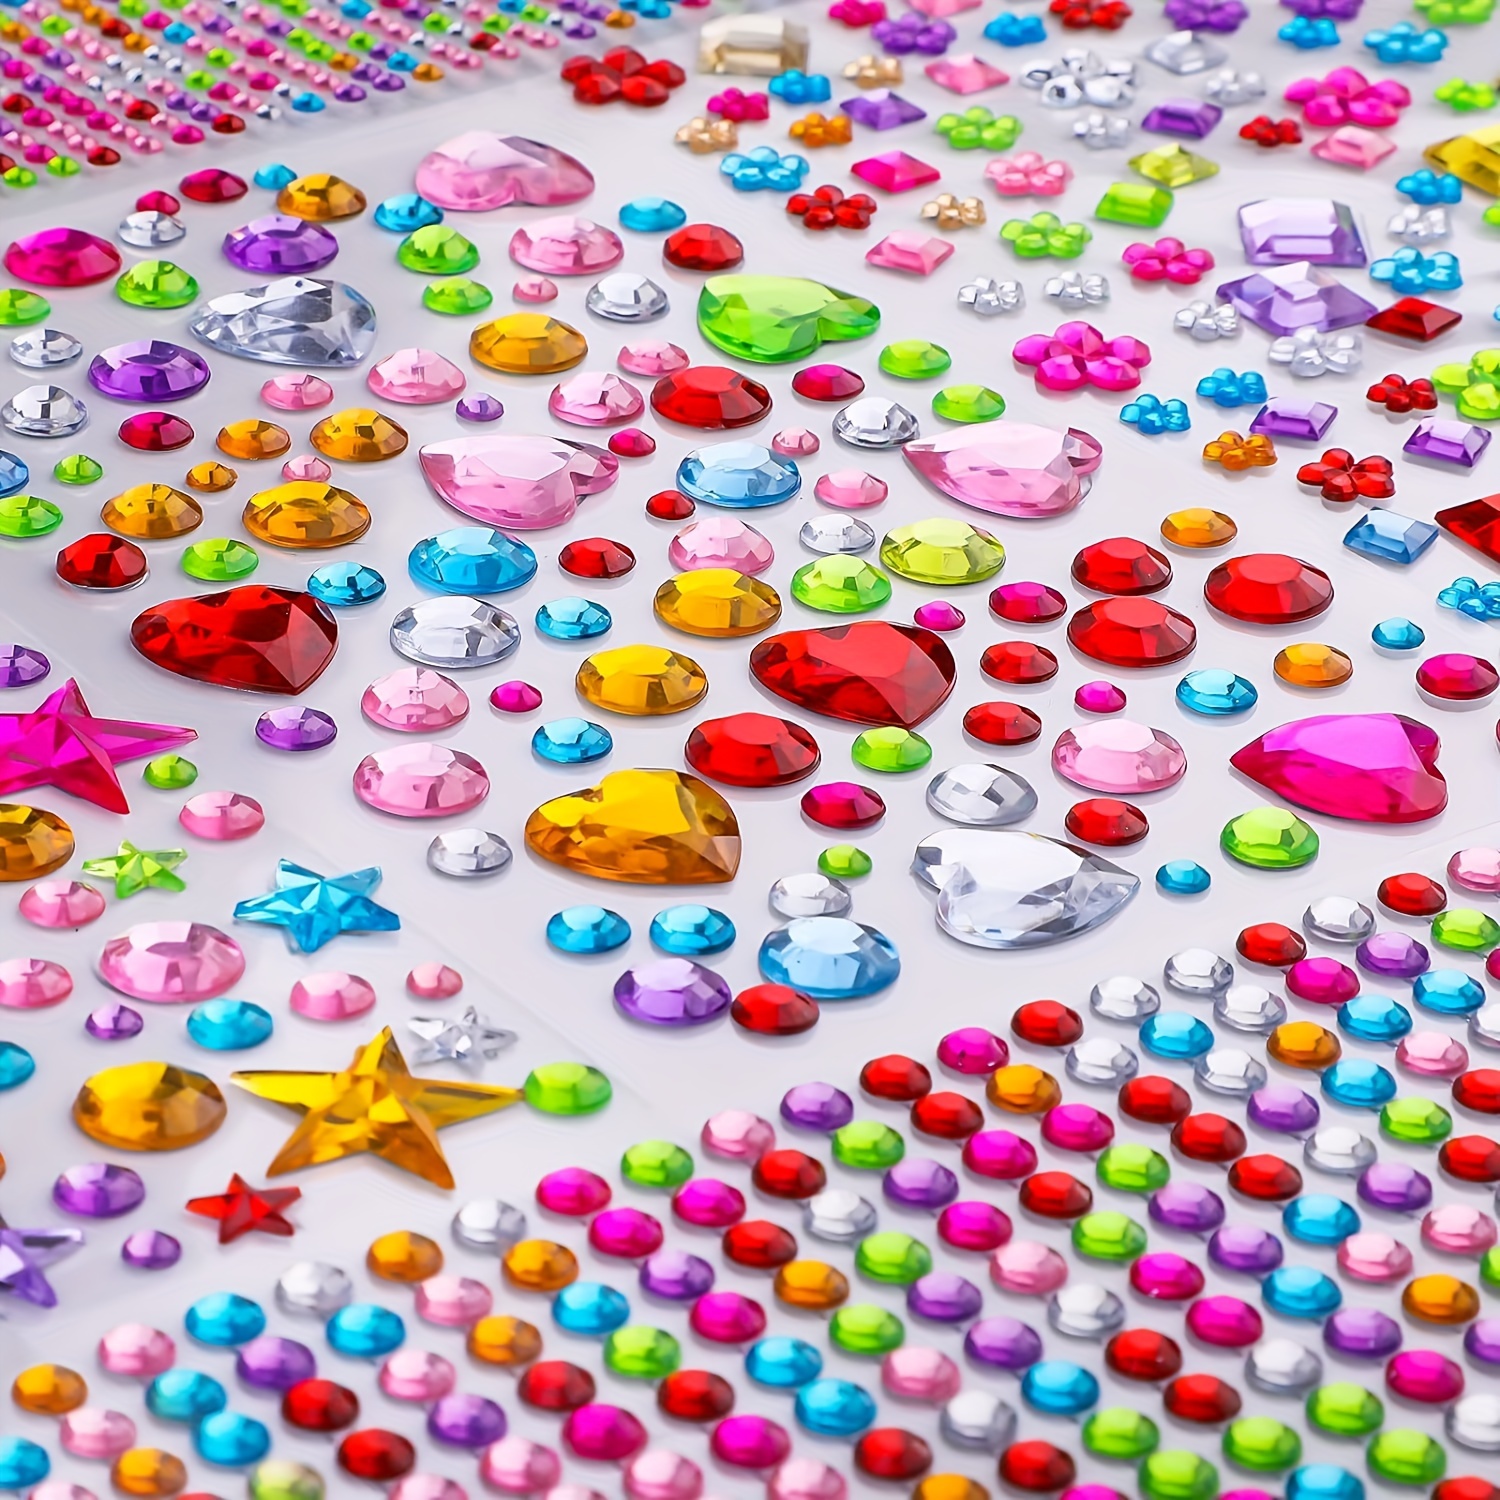 

1510pcs Rhinestone Stickers, Gem Stickers,self Adhesive Jewel Stickers, Bling Gems For Crafts, Stick On Gems For Makeup, Eye, Nail, Acrylic Bling Stickers